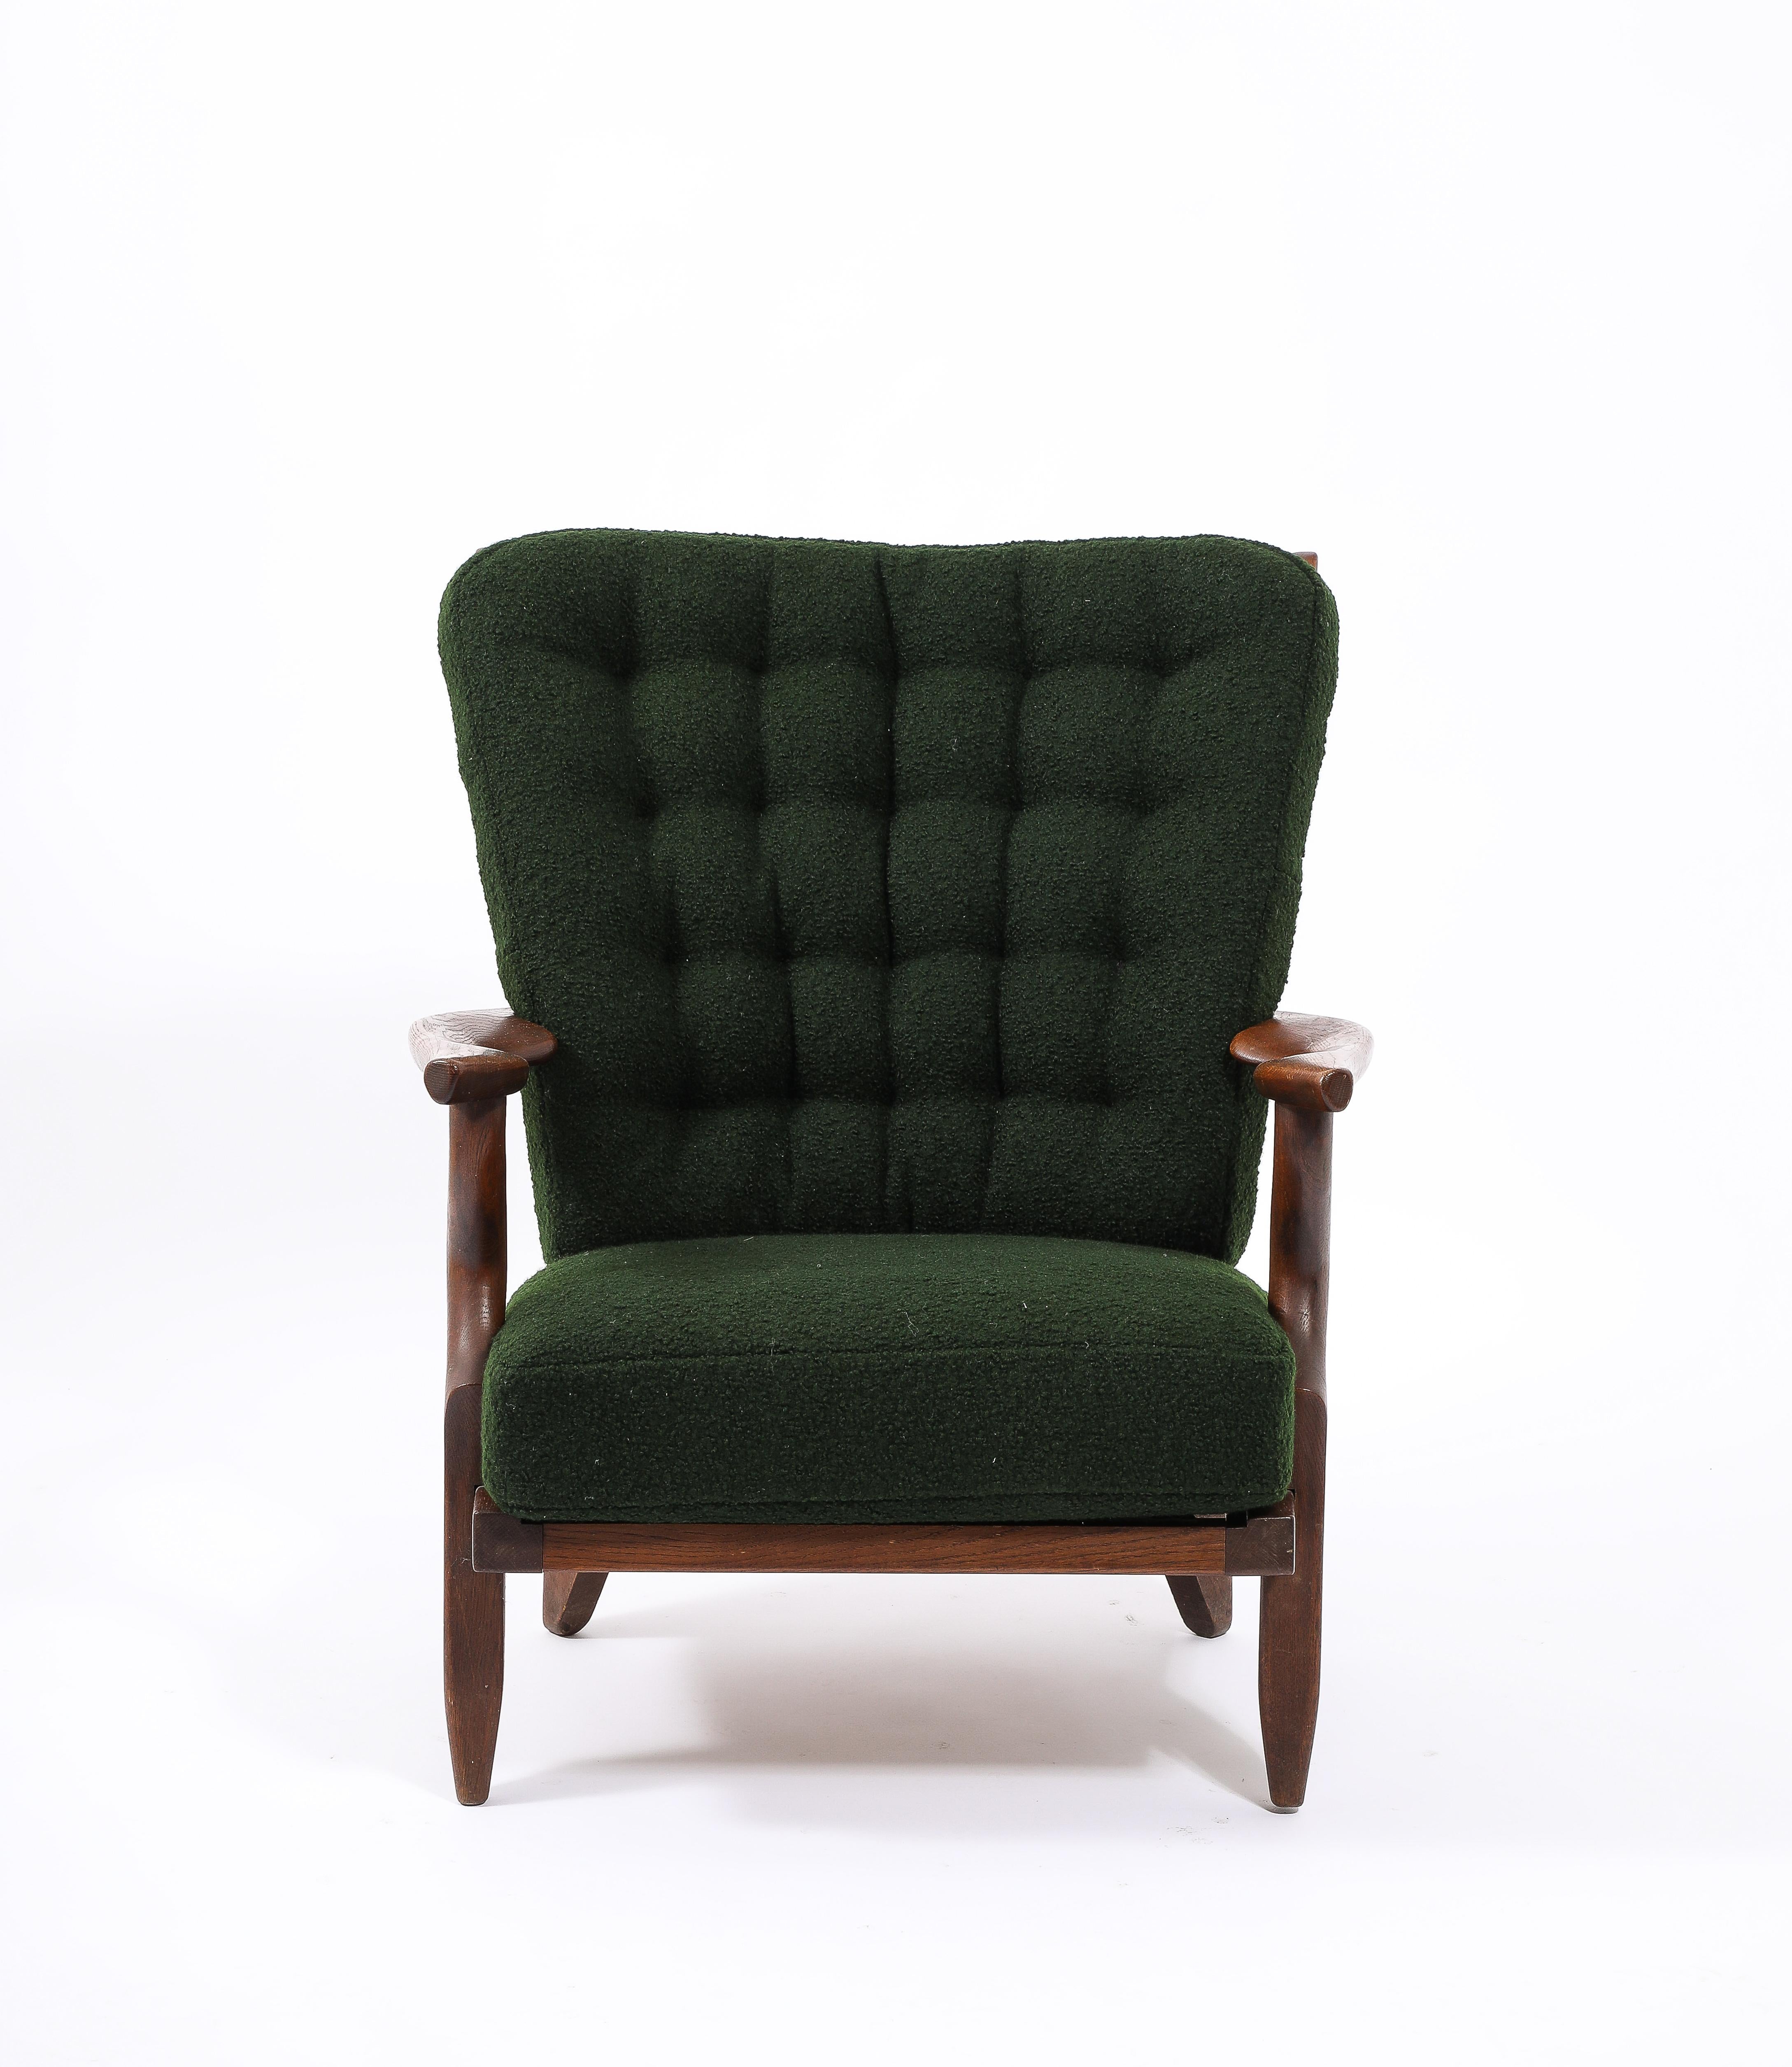 Guillerme & Chambron Petit Repos Armchair in Green Bouclé, France 1950's For Sale 2